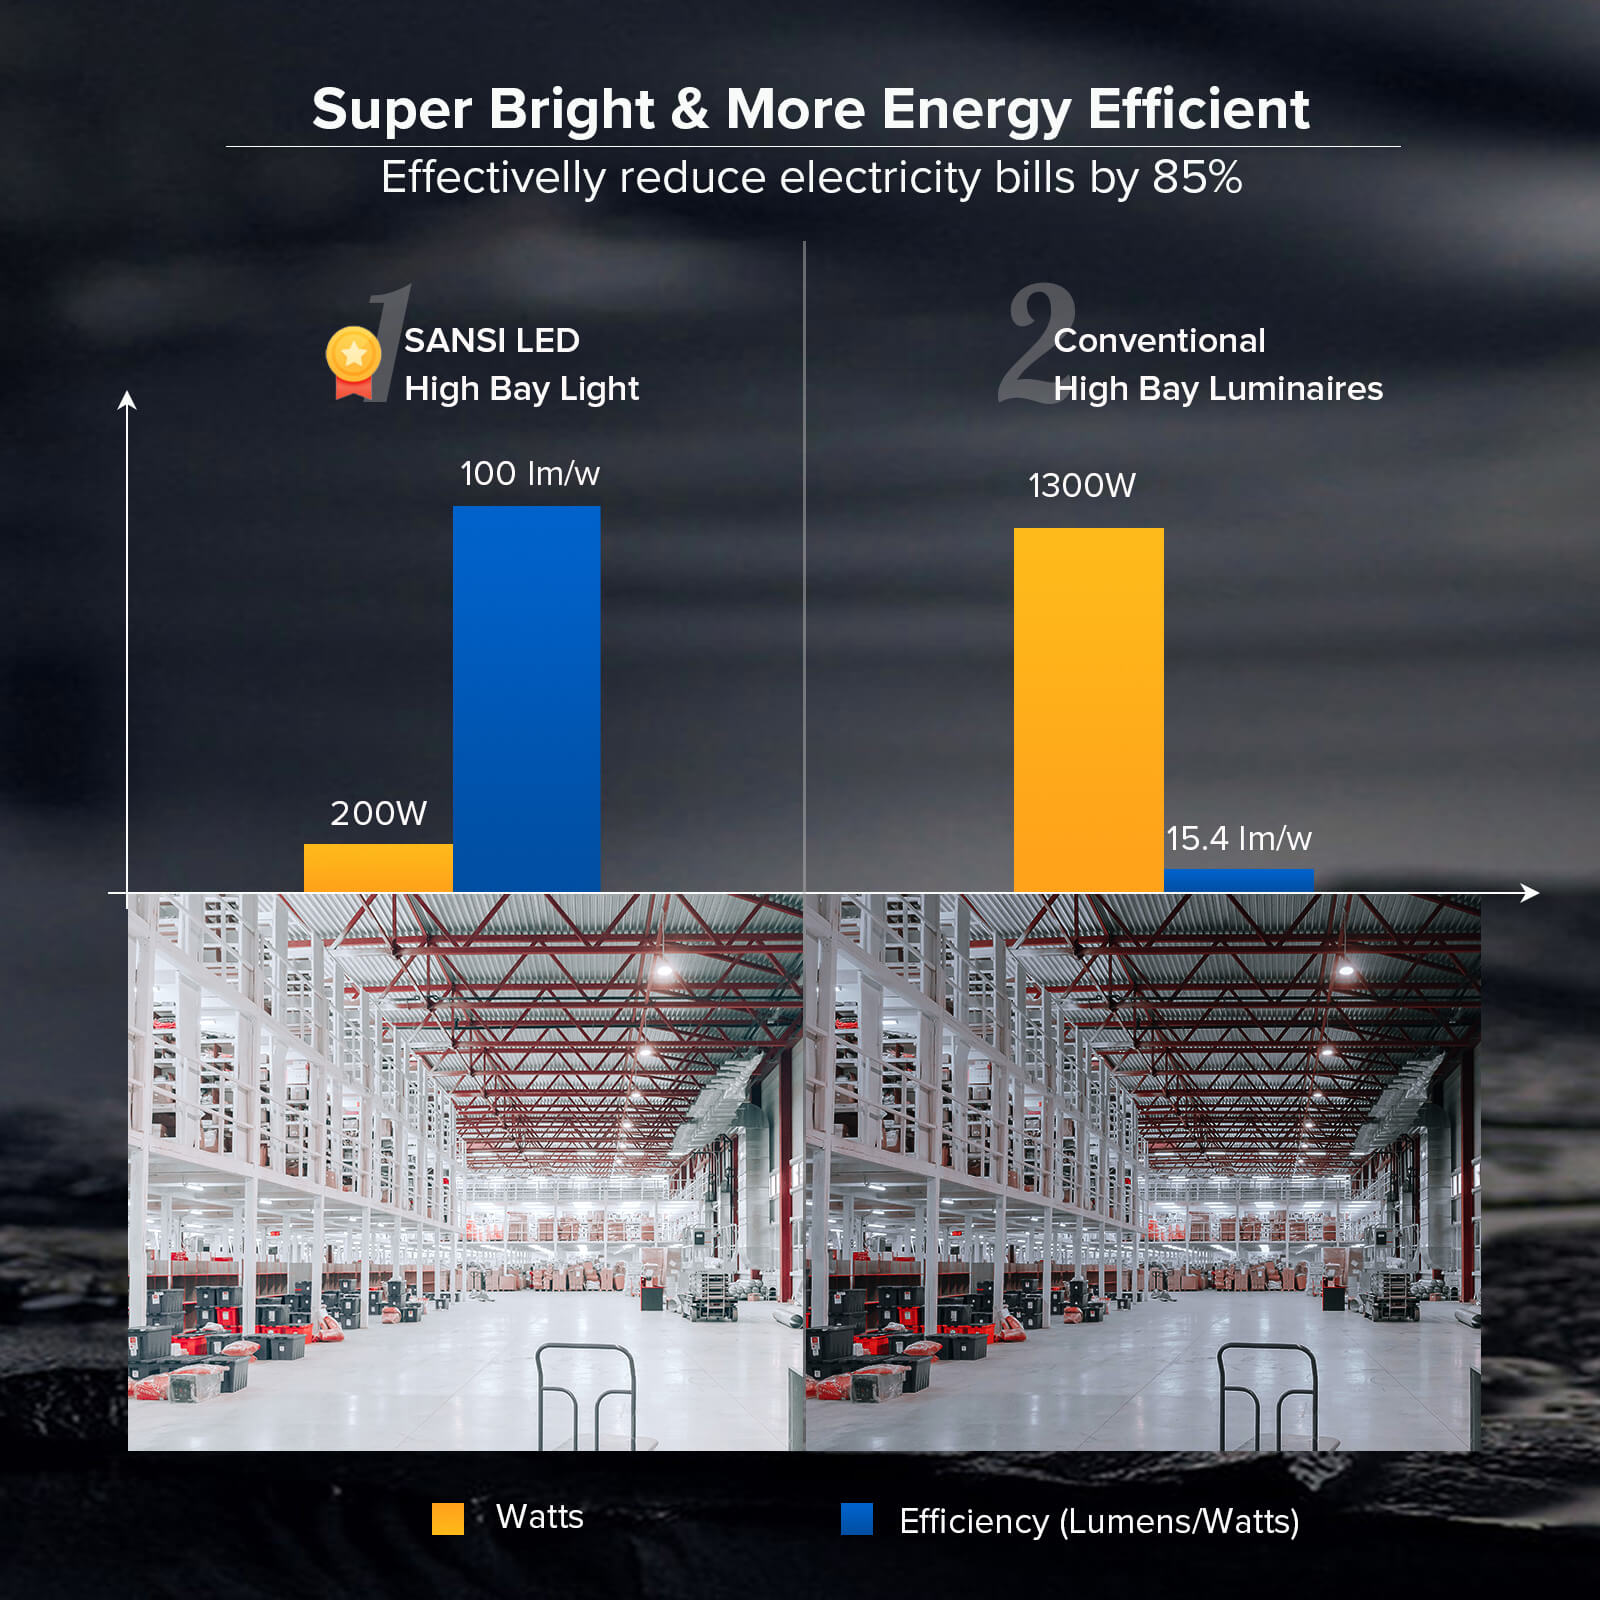 Super Bright & More Energy Efficient，Effectivelly reduce electricity bills by 85%.